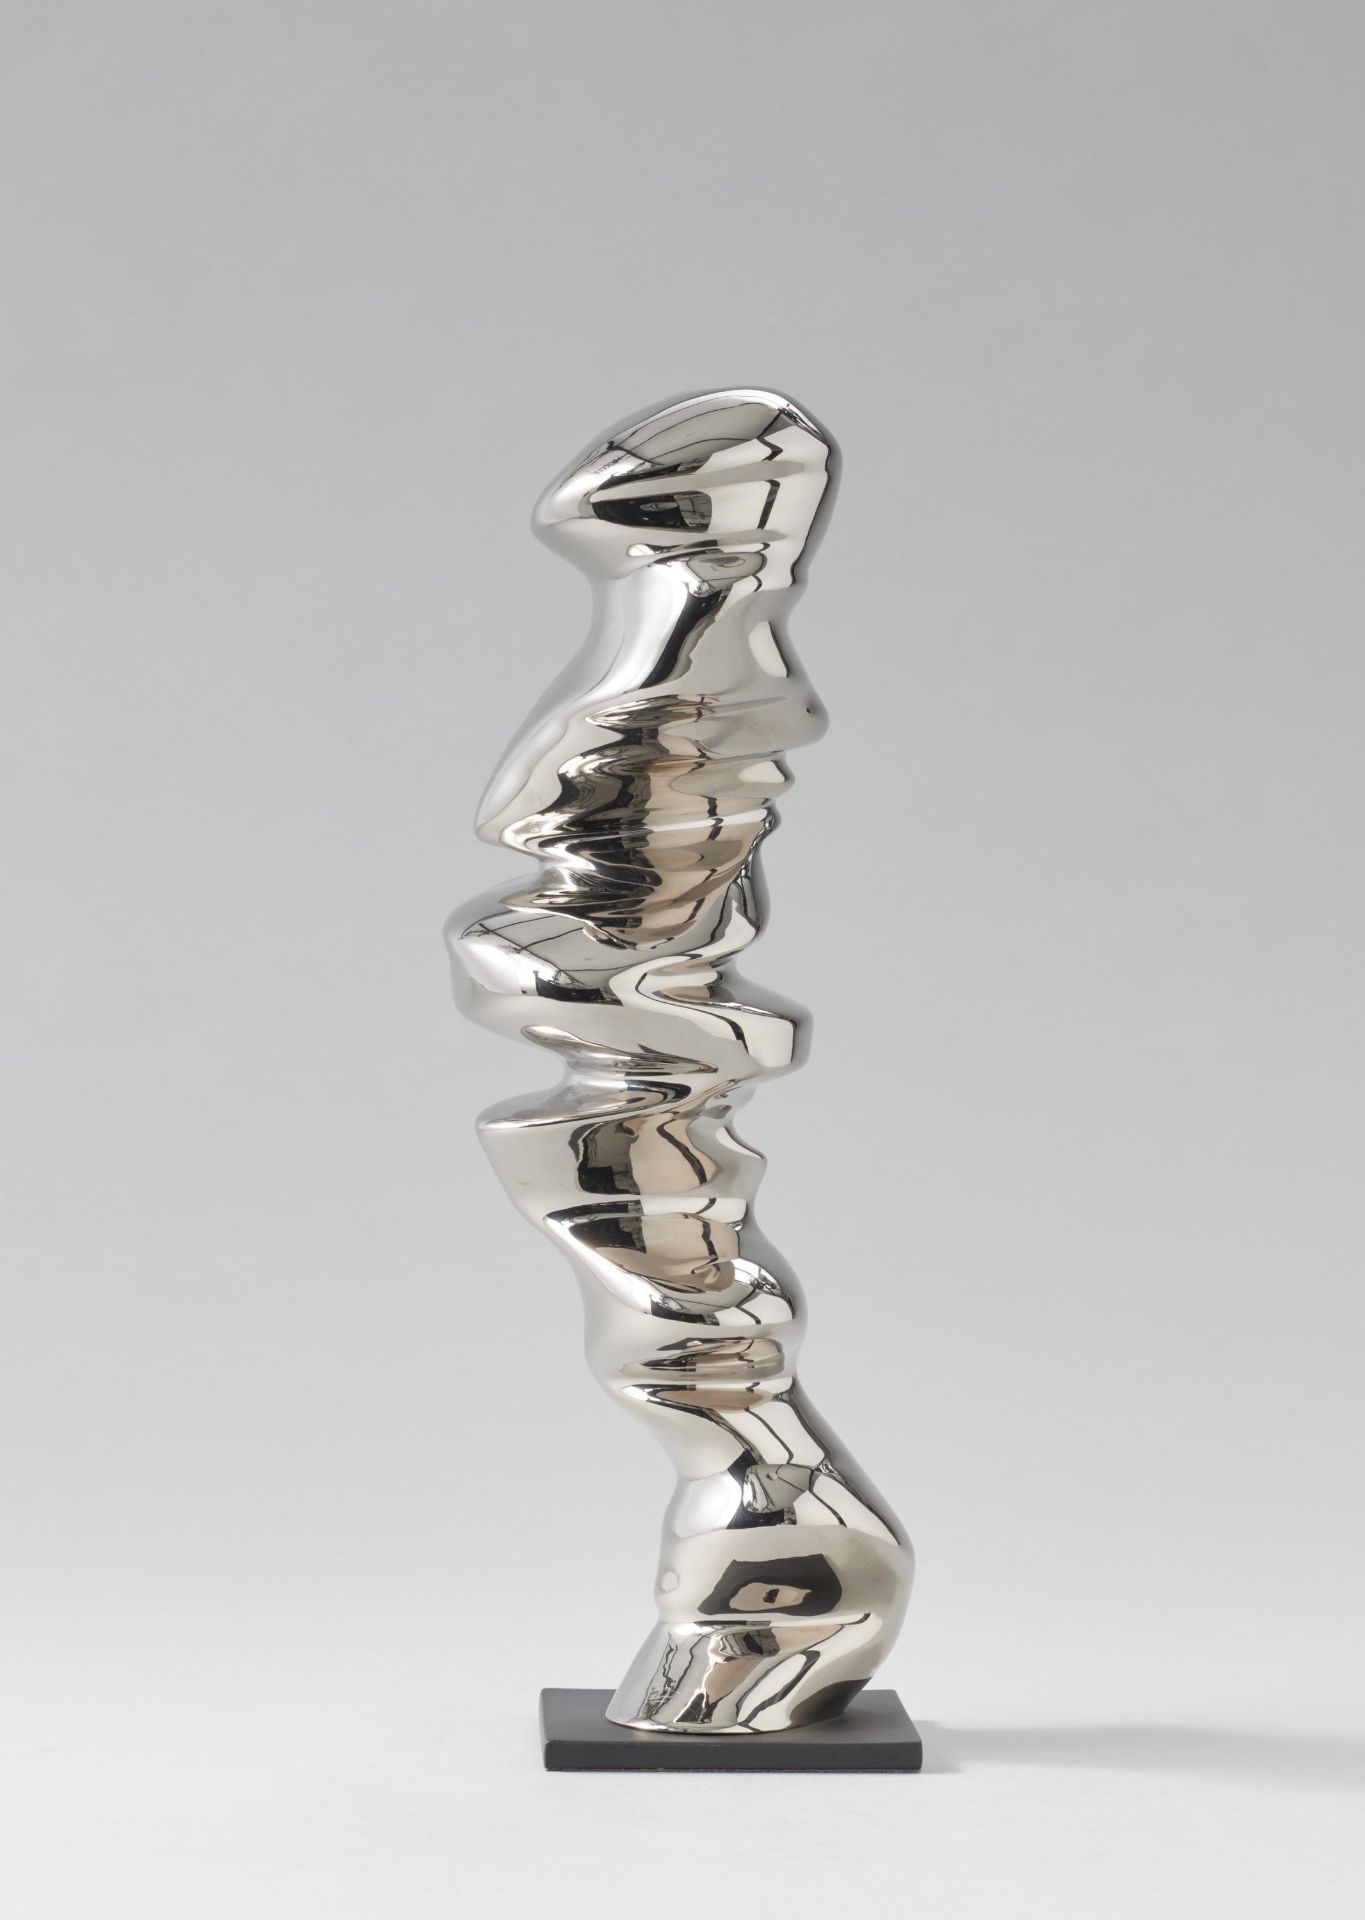 Tony Cragg: Points of View - Image 2 of 4